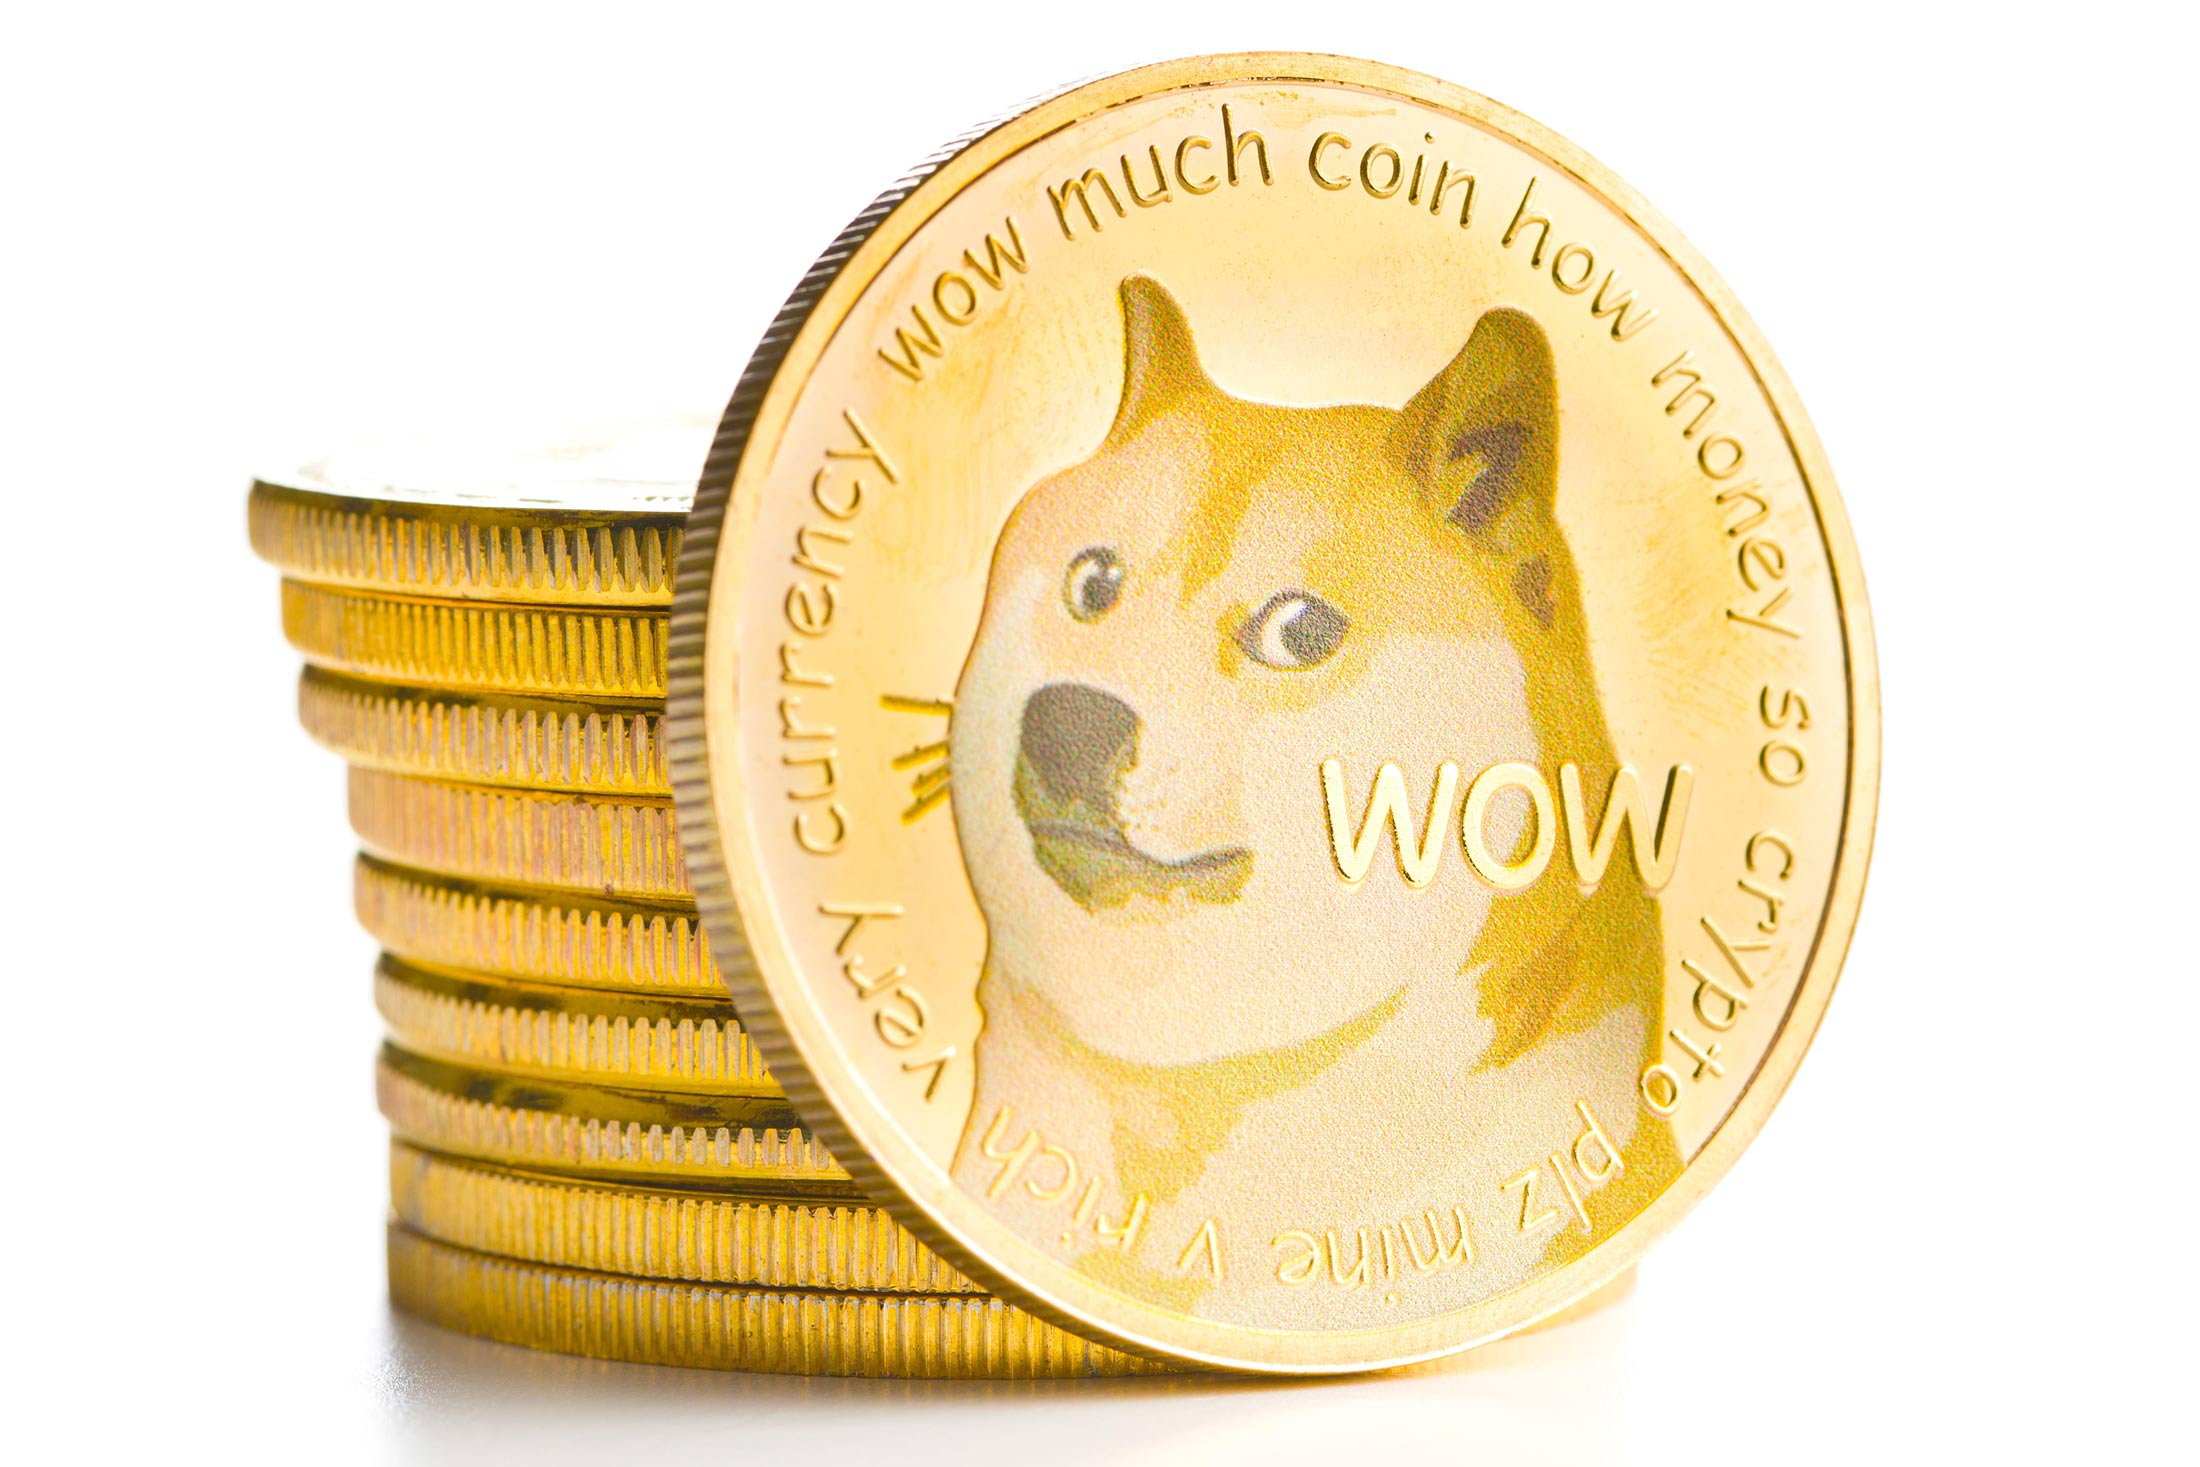 Dogecoin price today, DOGE to USD live price, marketcap and chart | CoinMarketCap